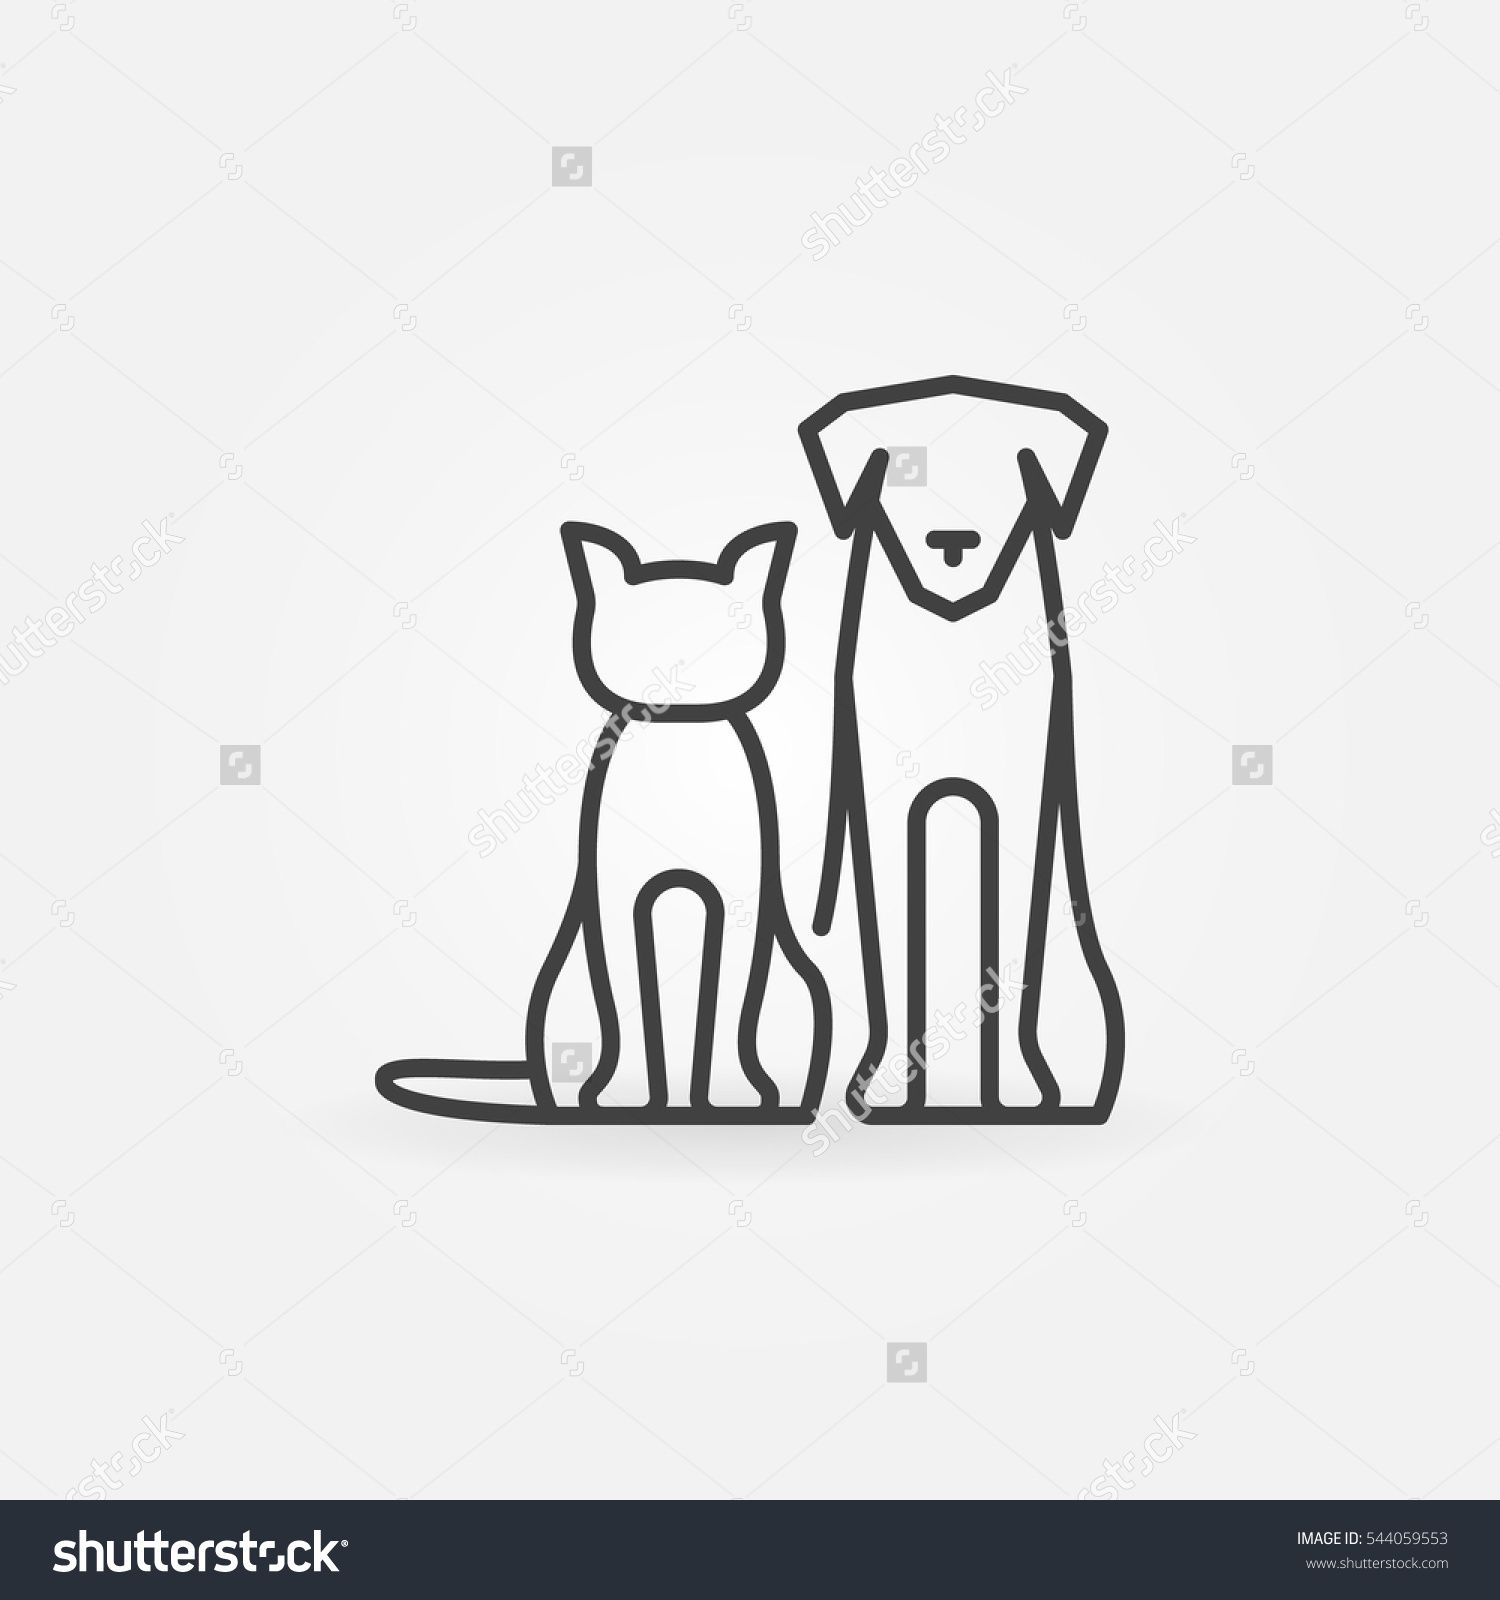 Cat with dog.